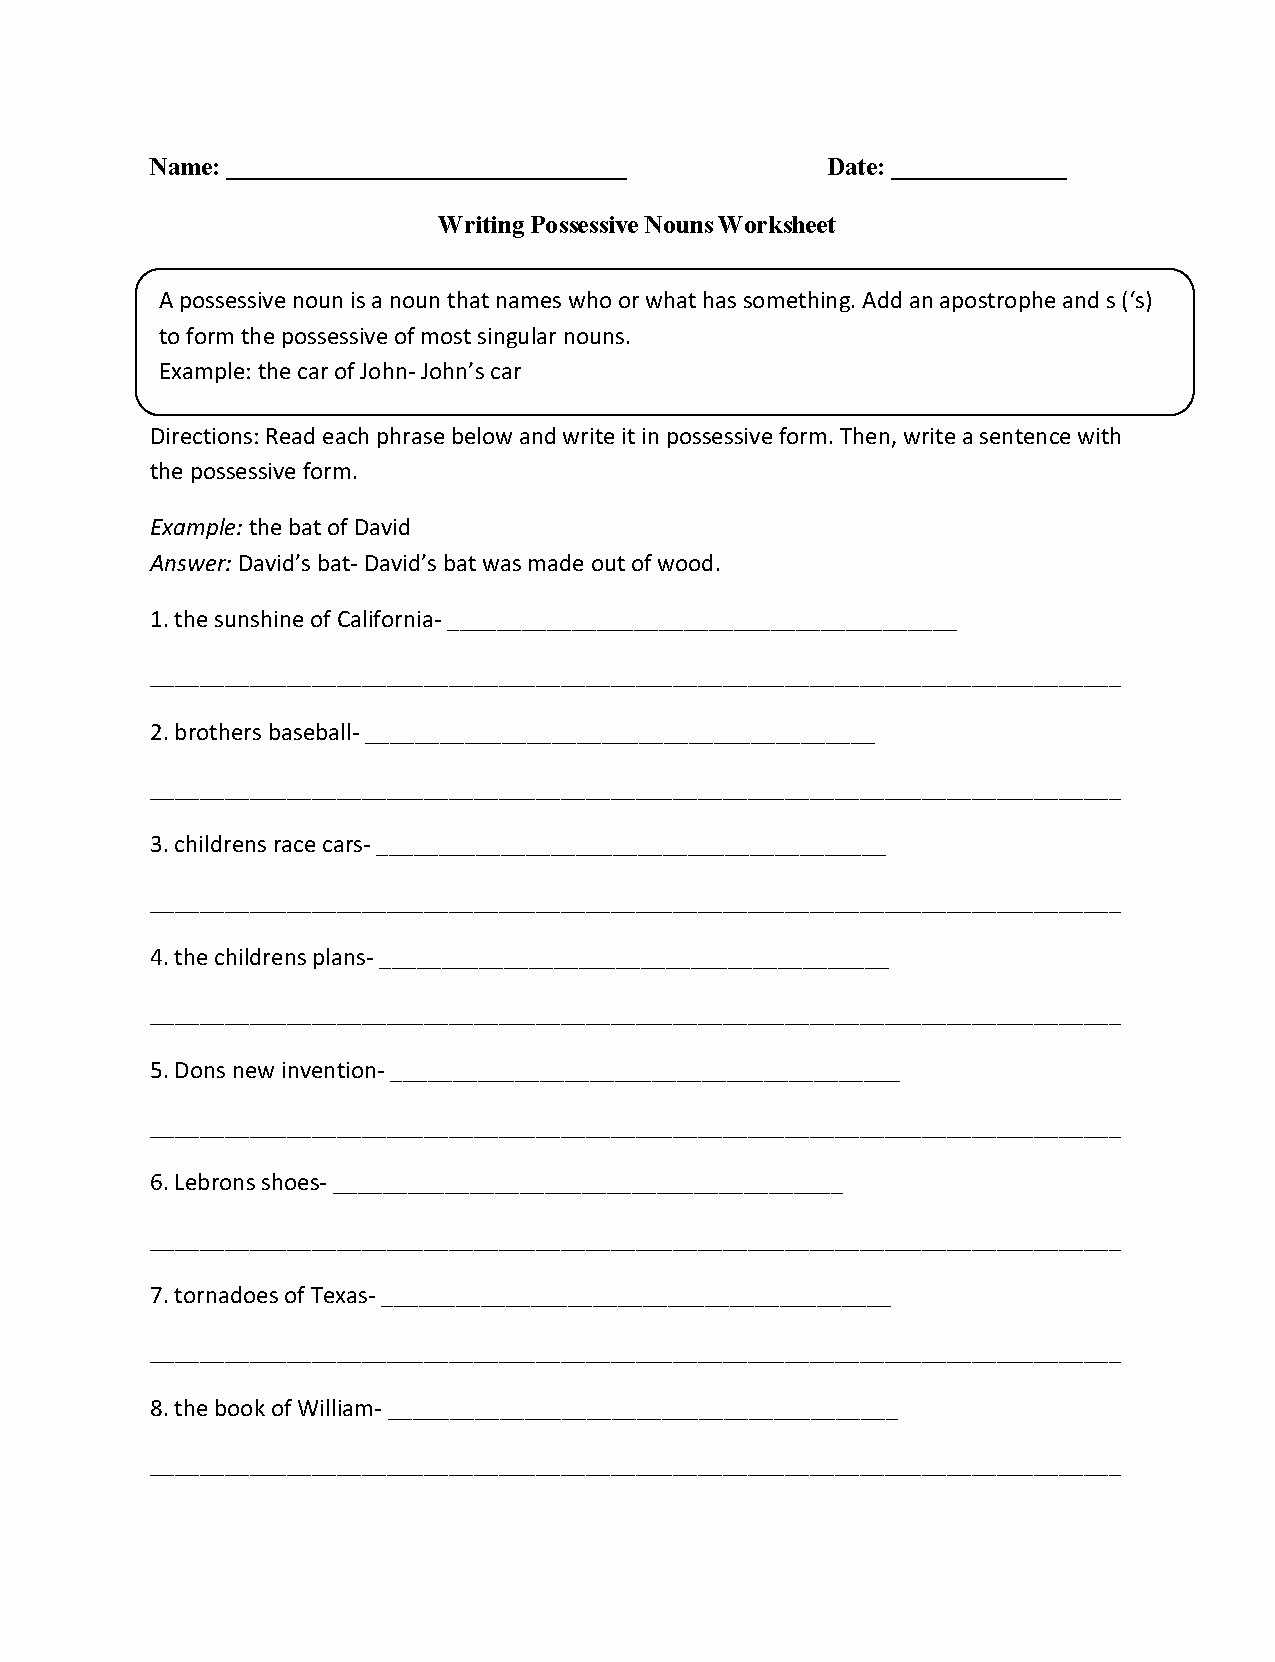 32-pretty-picture-of-pronoun-antecedent-agreement-worksheets